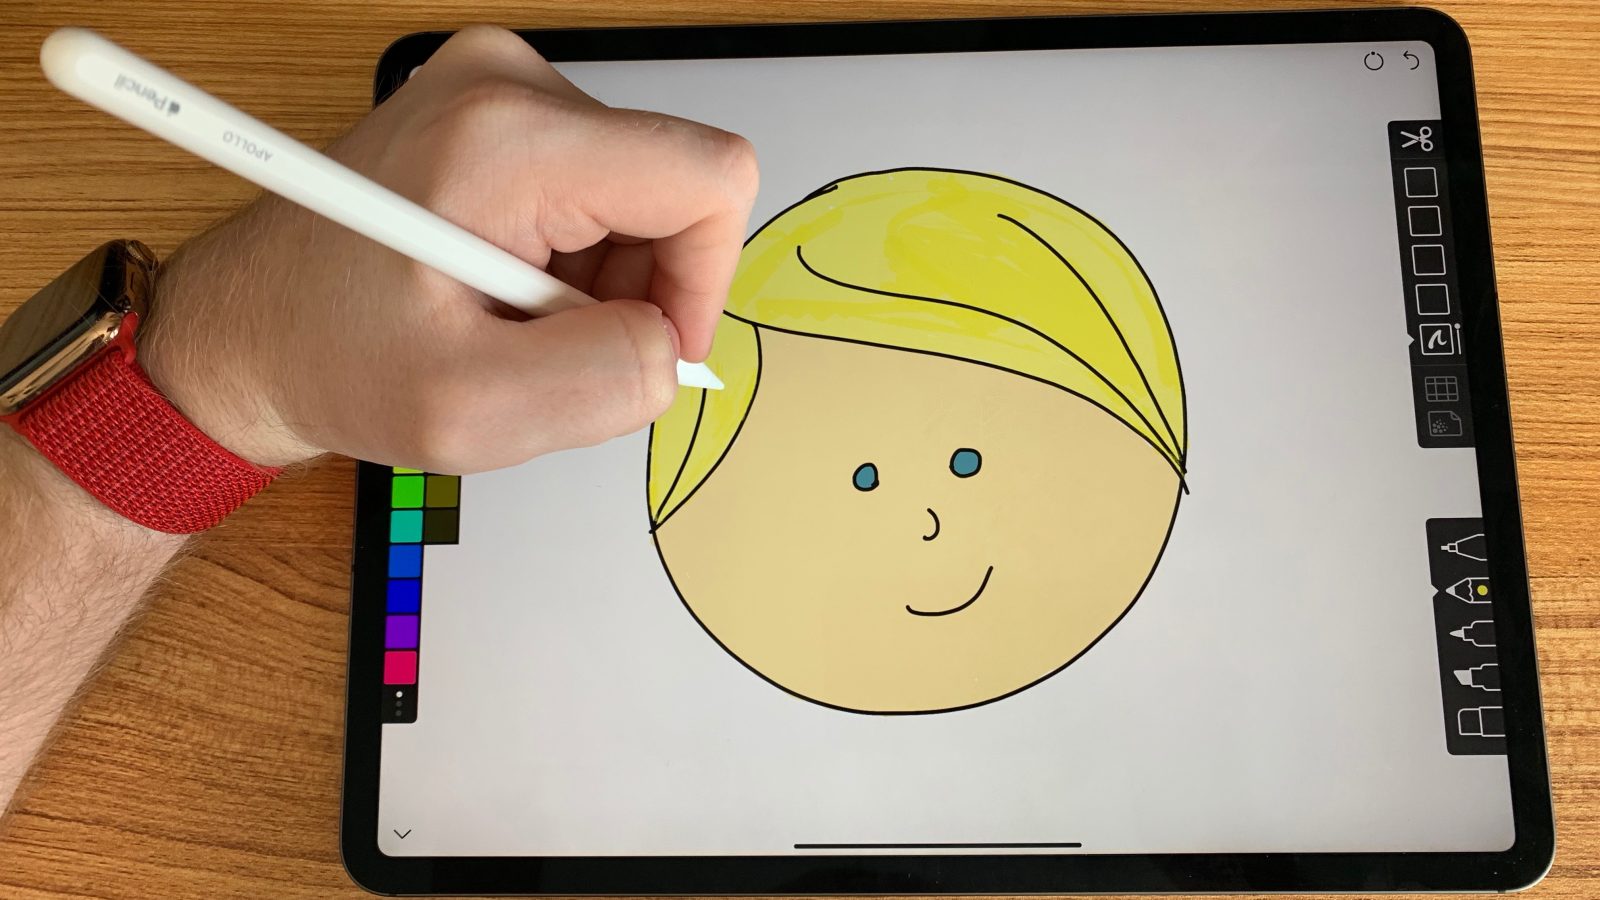 Linea Sketch Updated For Ipad Pro With Apple Pencil Gestures New